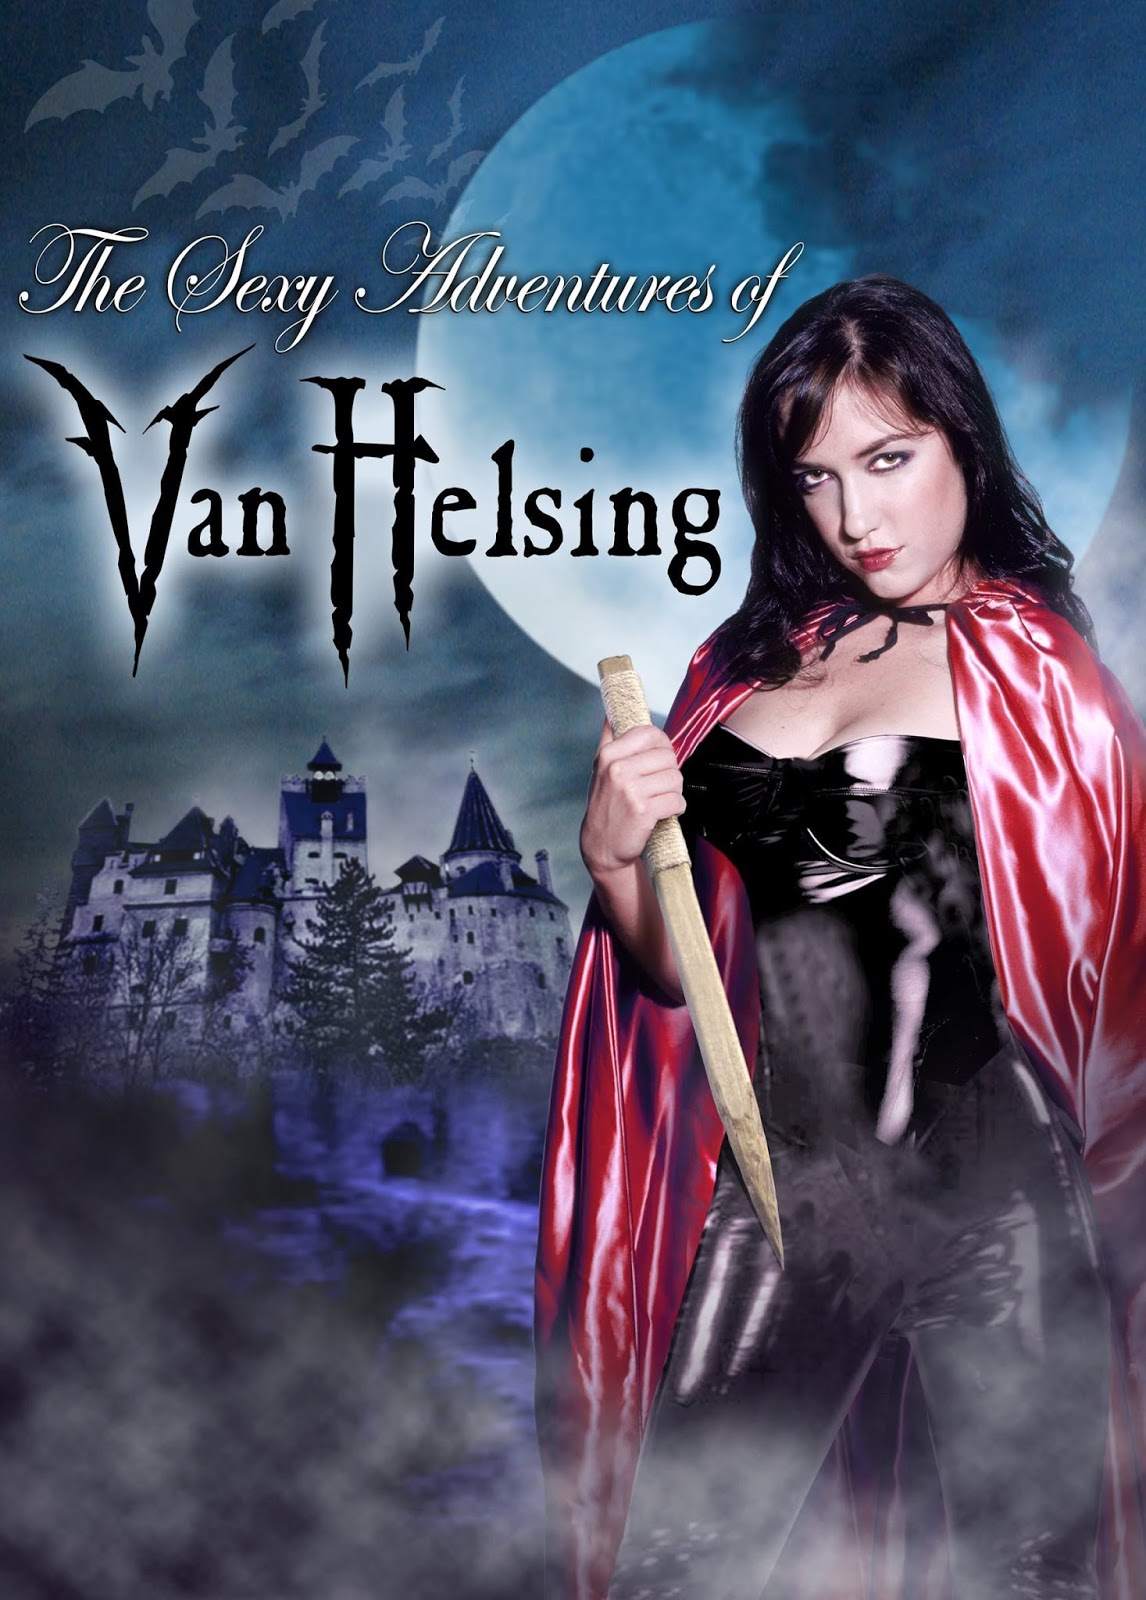 18+ The Sexy Adventures of Van Helsing 2018 English Hot Movie HDRip 700MB D...